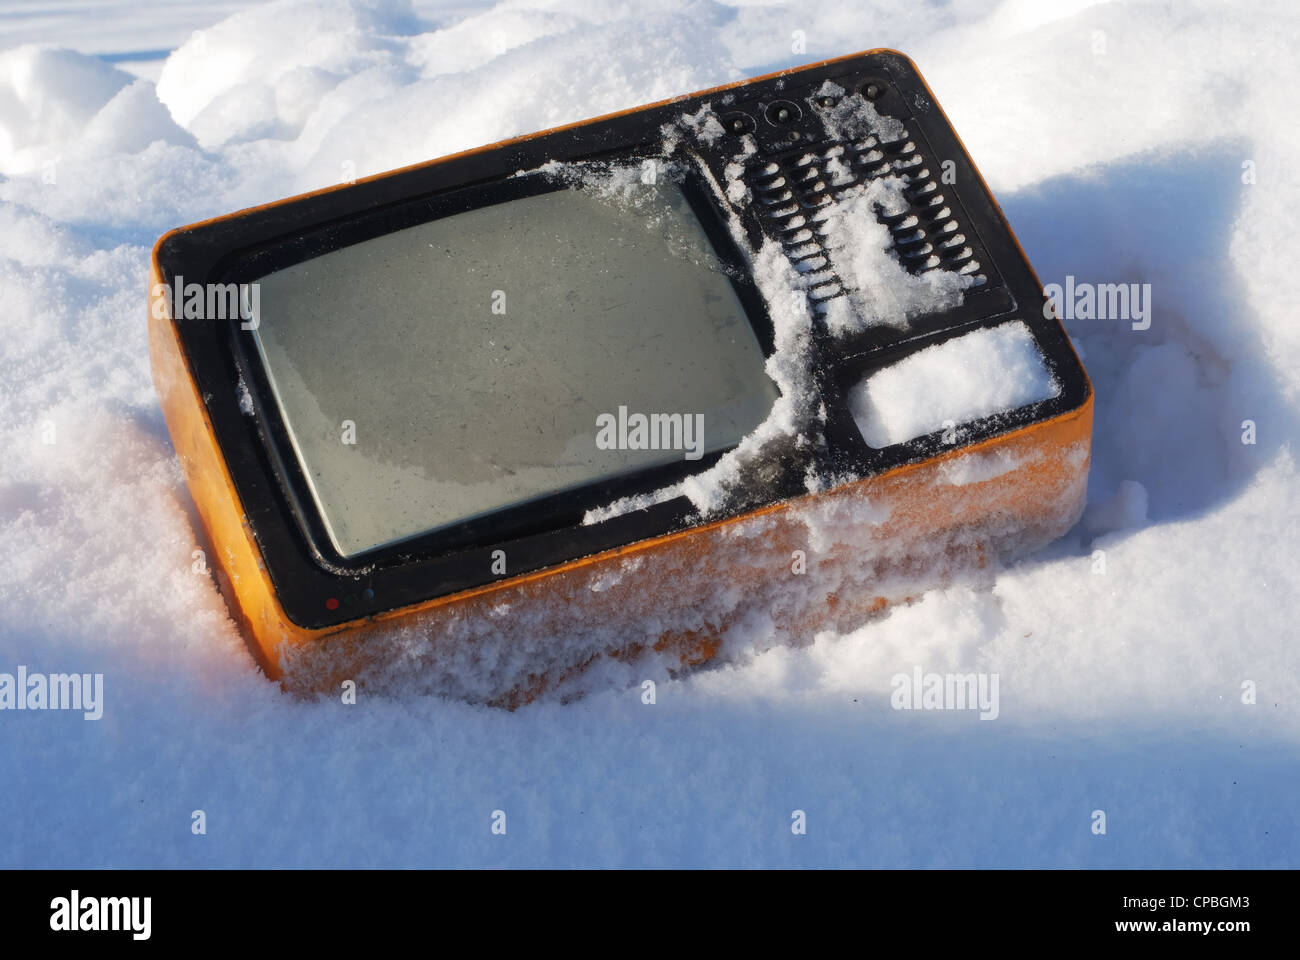 old broken television set on the snow Stock Photo